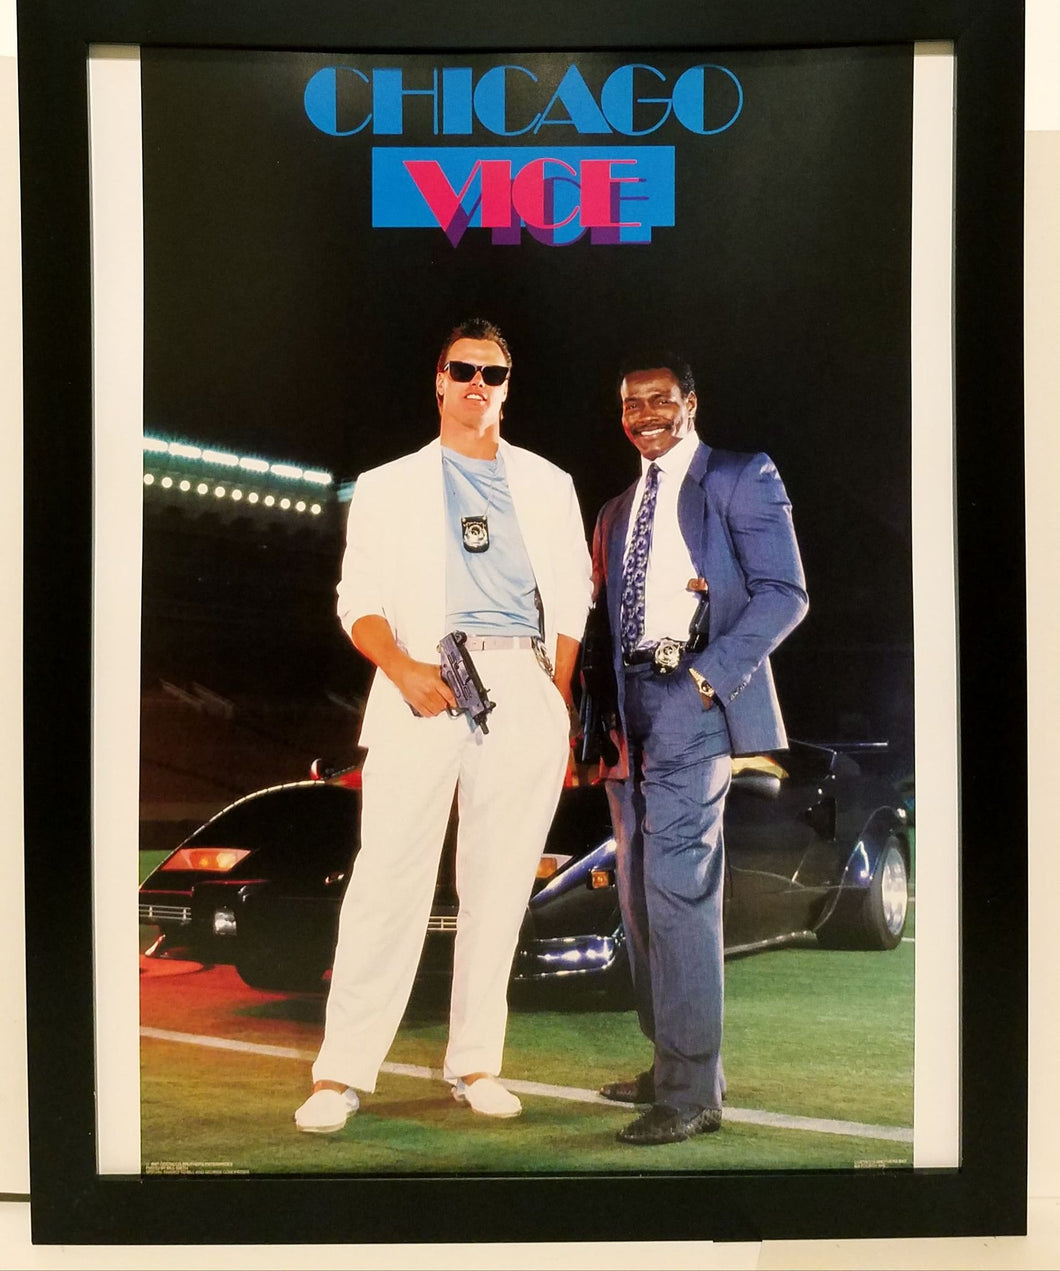 Chicago Vice Bears Payton Costacos Brothers 8.5x11 FRAMED Print Vintage 80s Poster